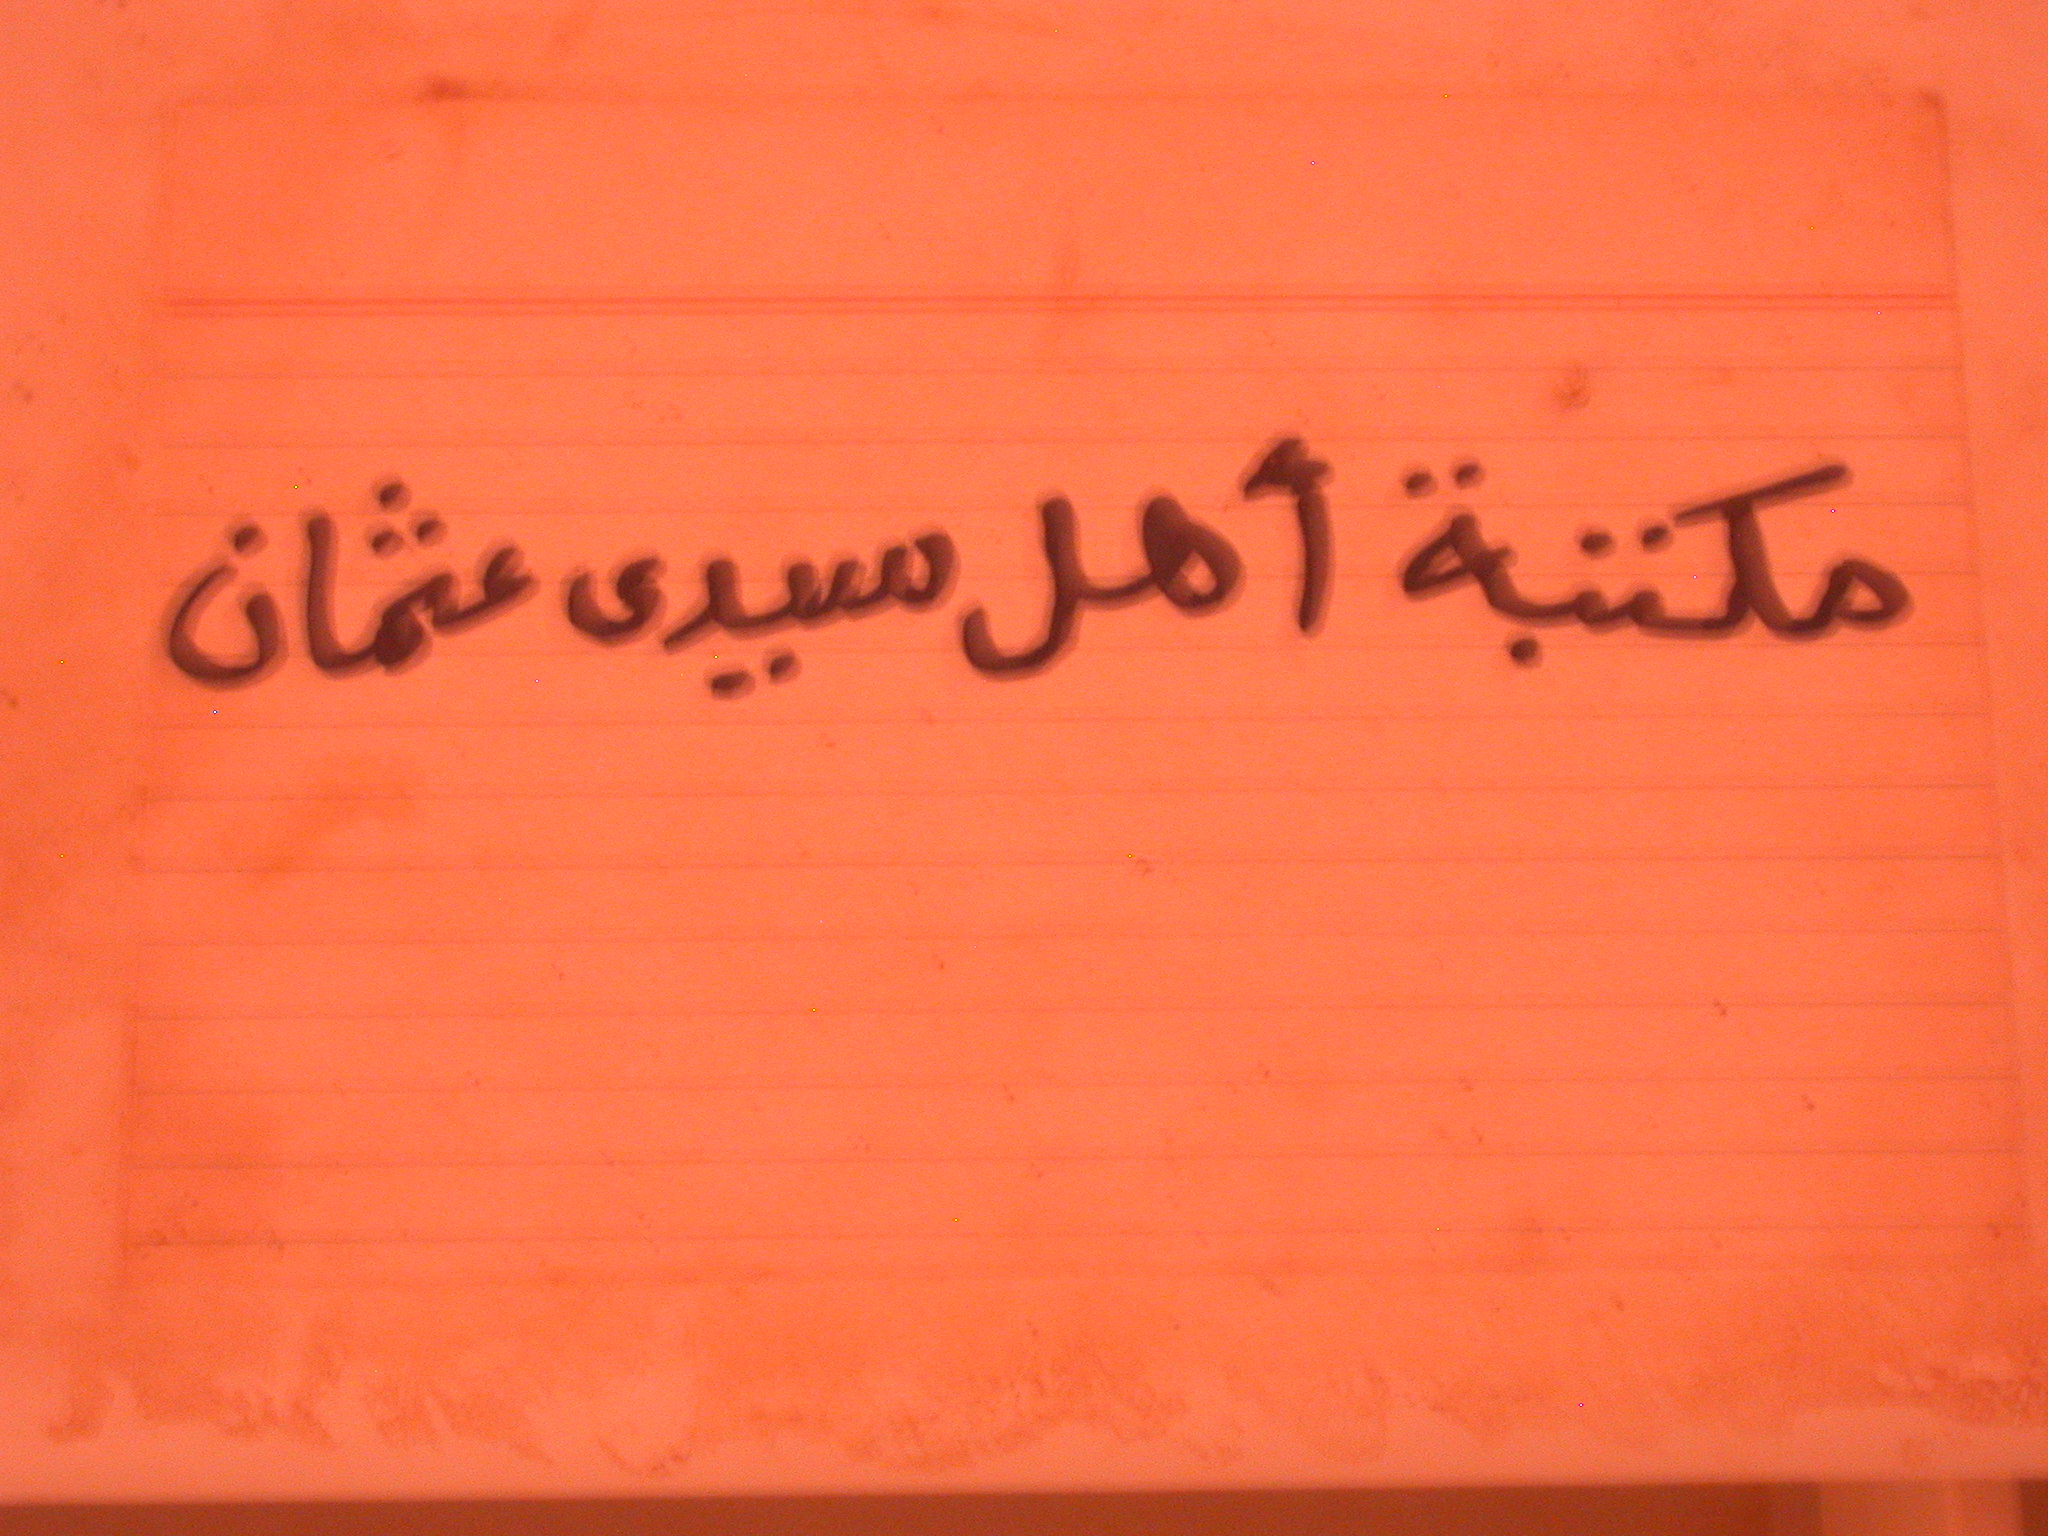 Label on Book Repository at Library in Ancient City of Oulata, Mauritania